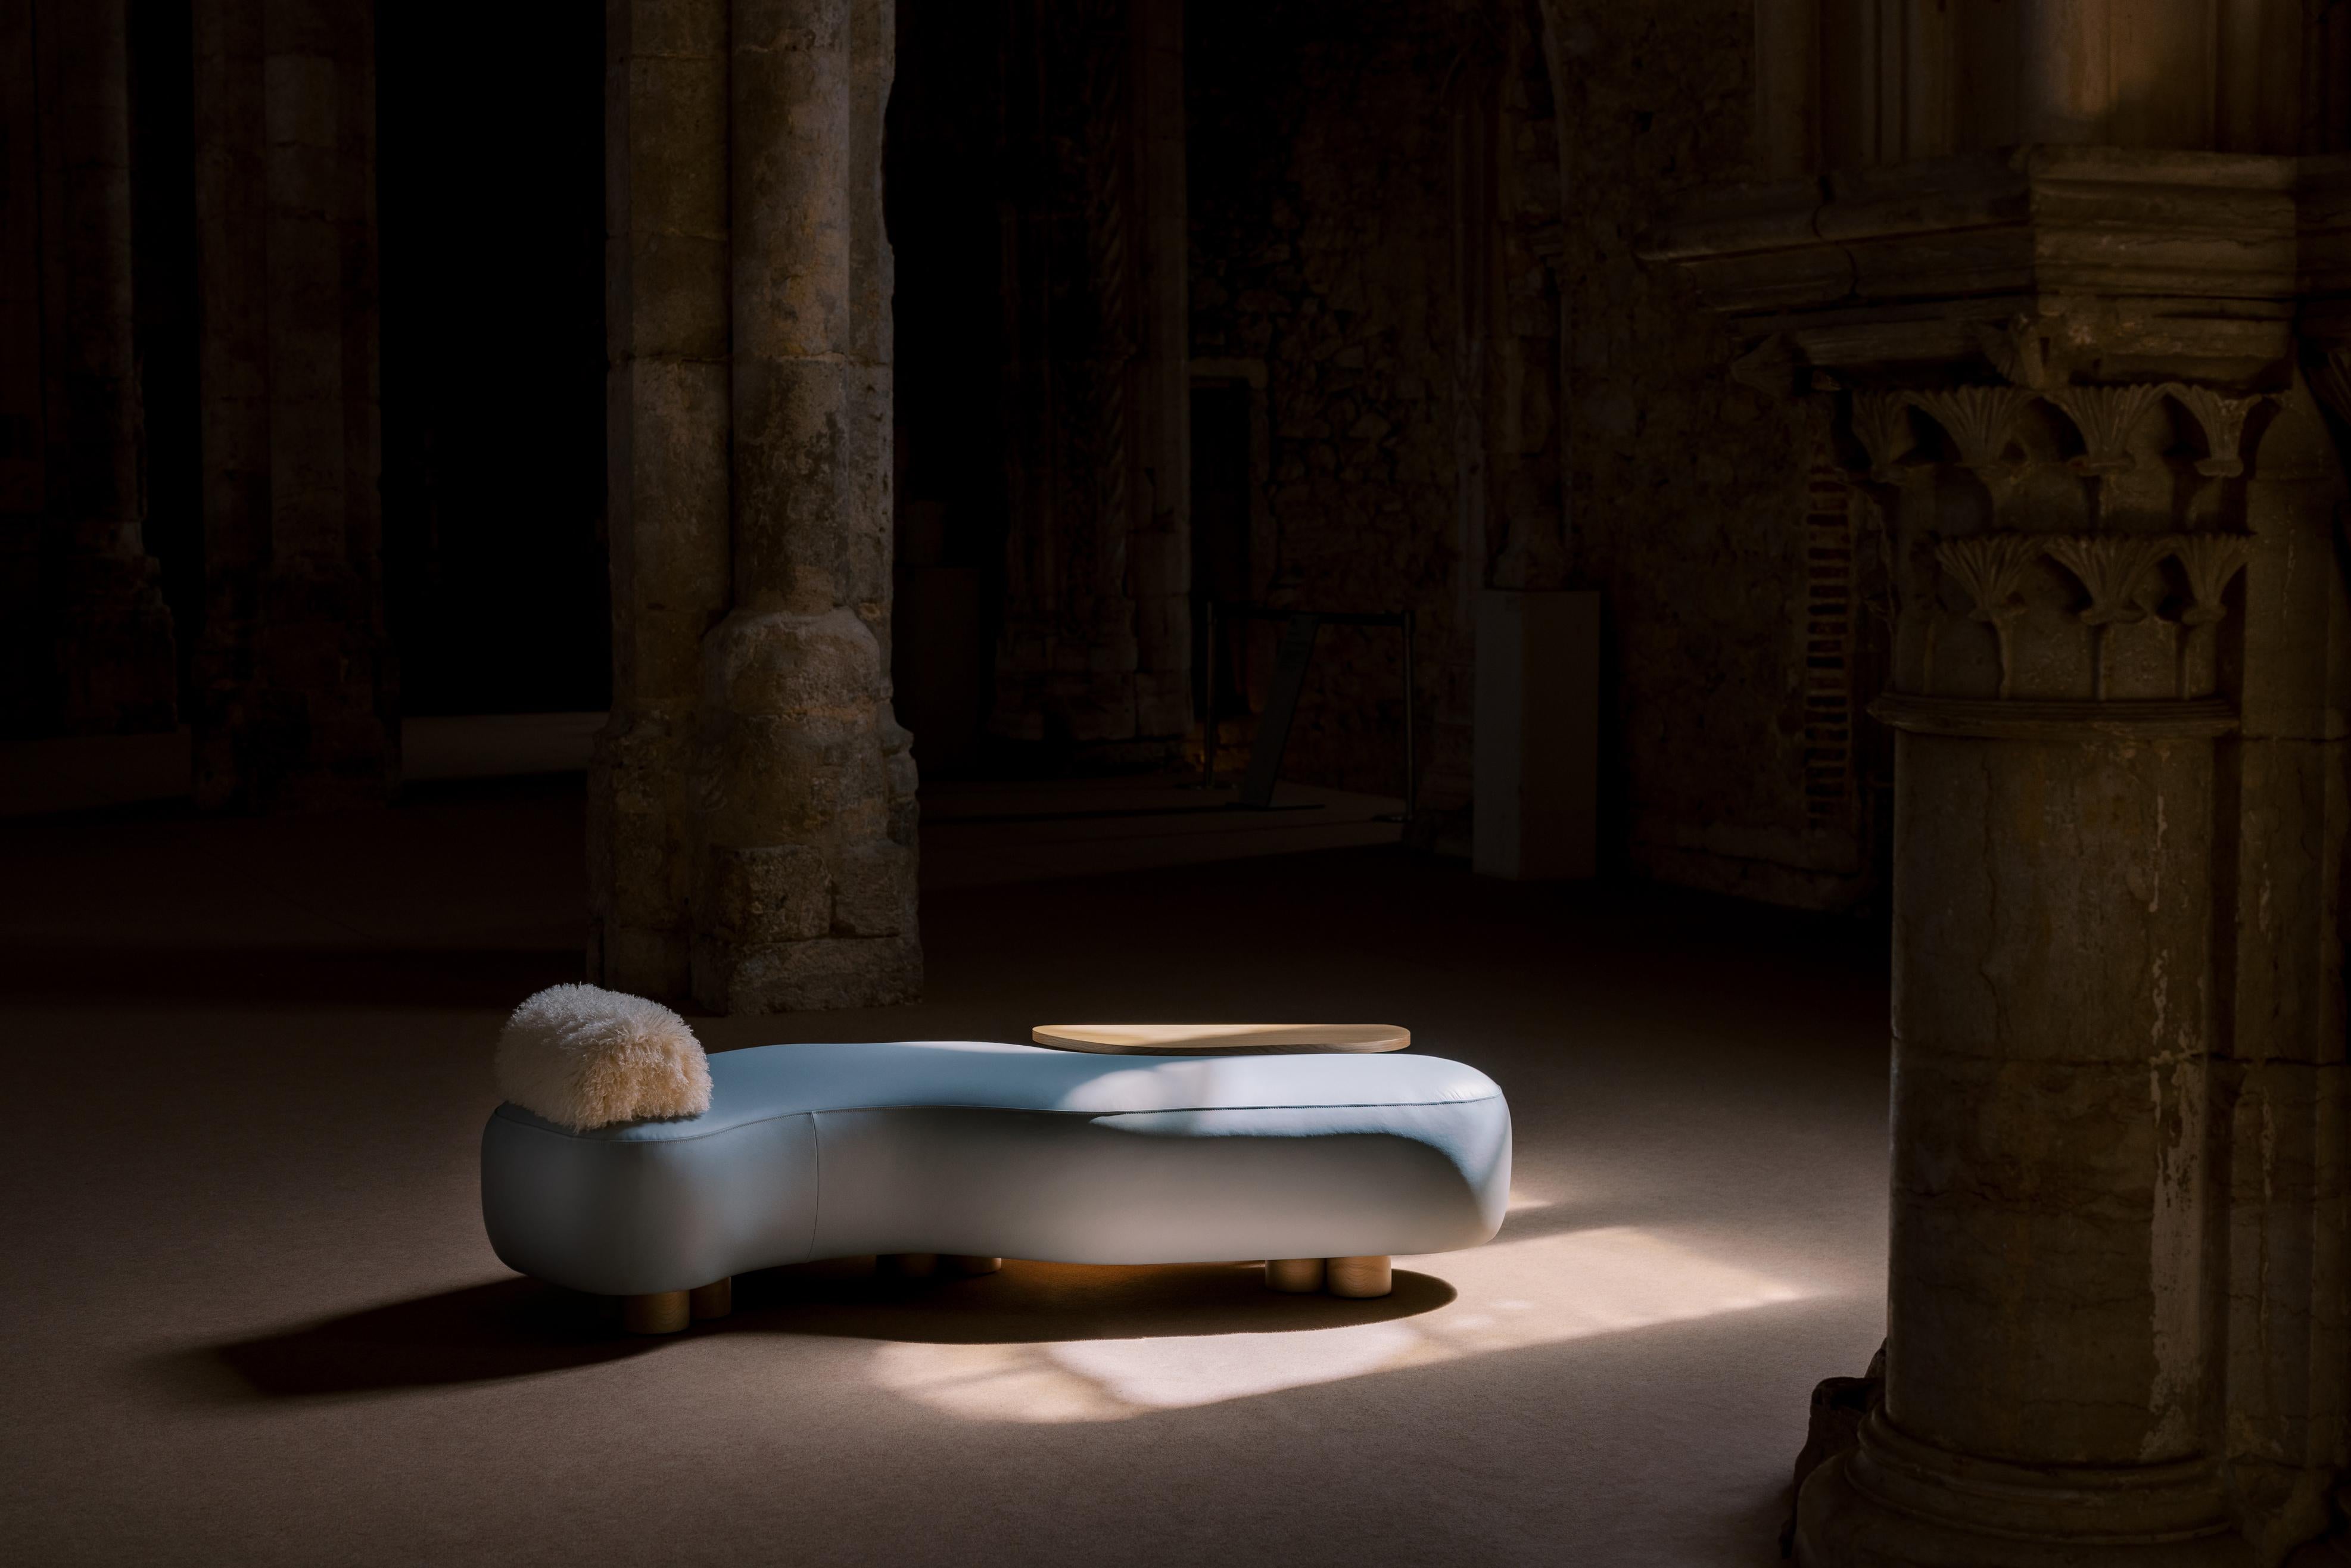 Minho Day Bed, Contemporary Collection, Handcrafted in Portugal - Europe by Greenapple.

Designed by Rute Martins for the Contemporary Collection, the Minho day bed with a wooden side table is a modern interpretation of the traditional furniture